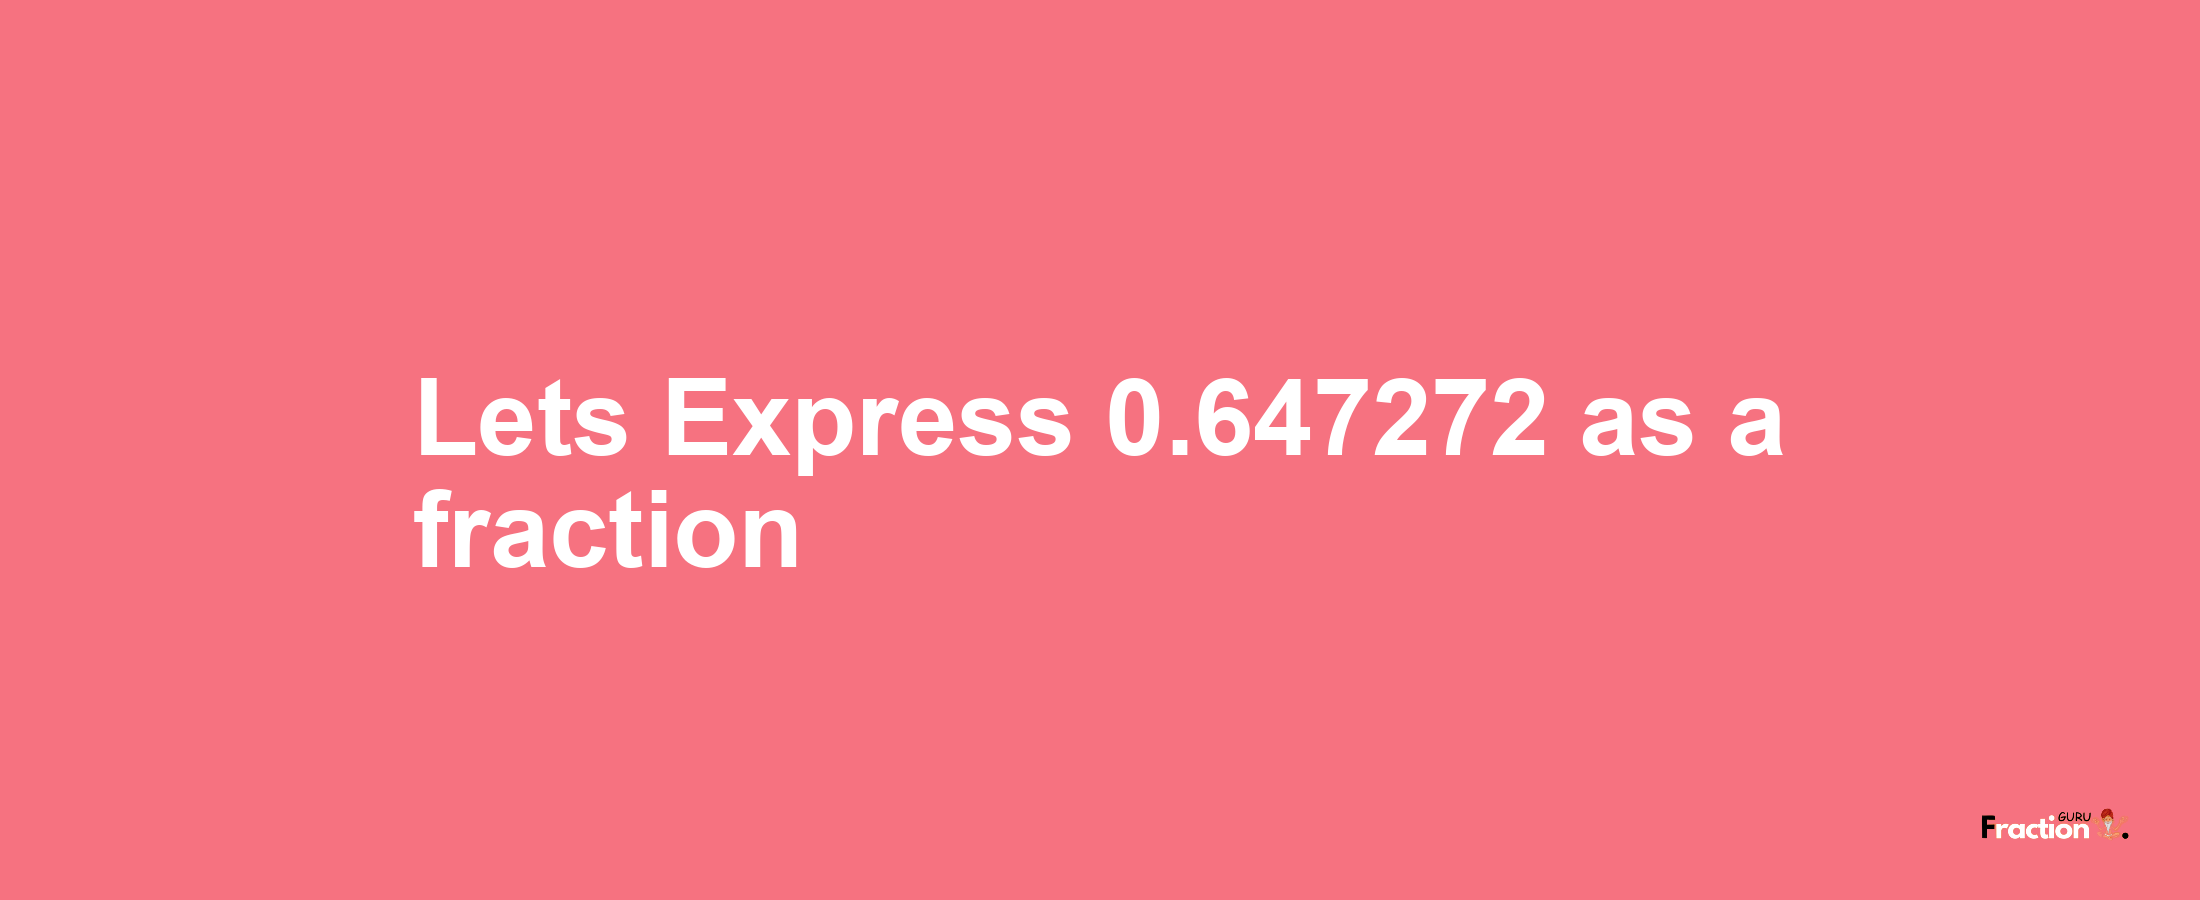 Lets Express 0.647272 as afraction